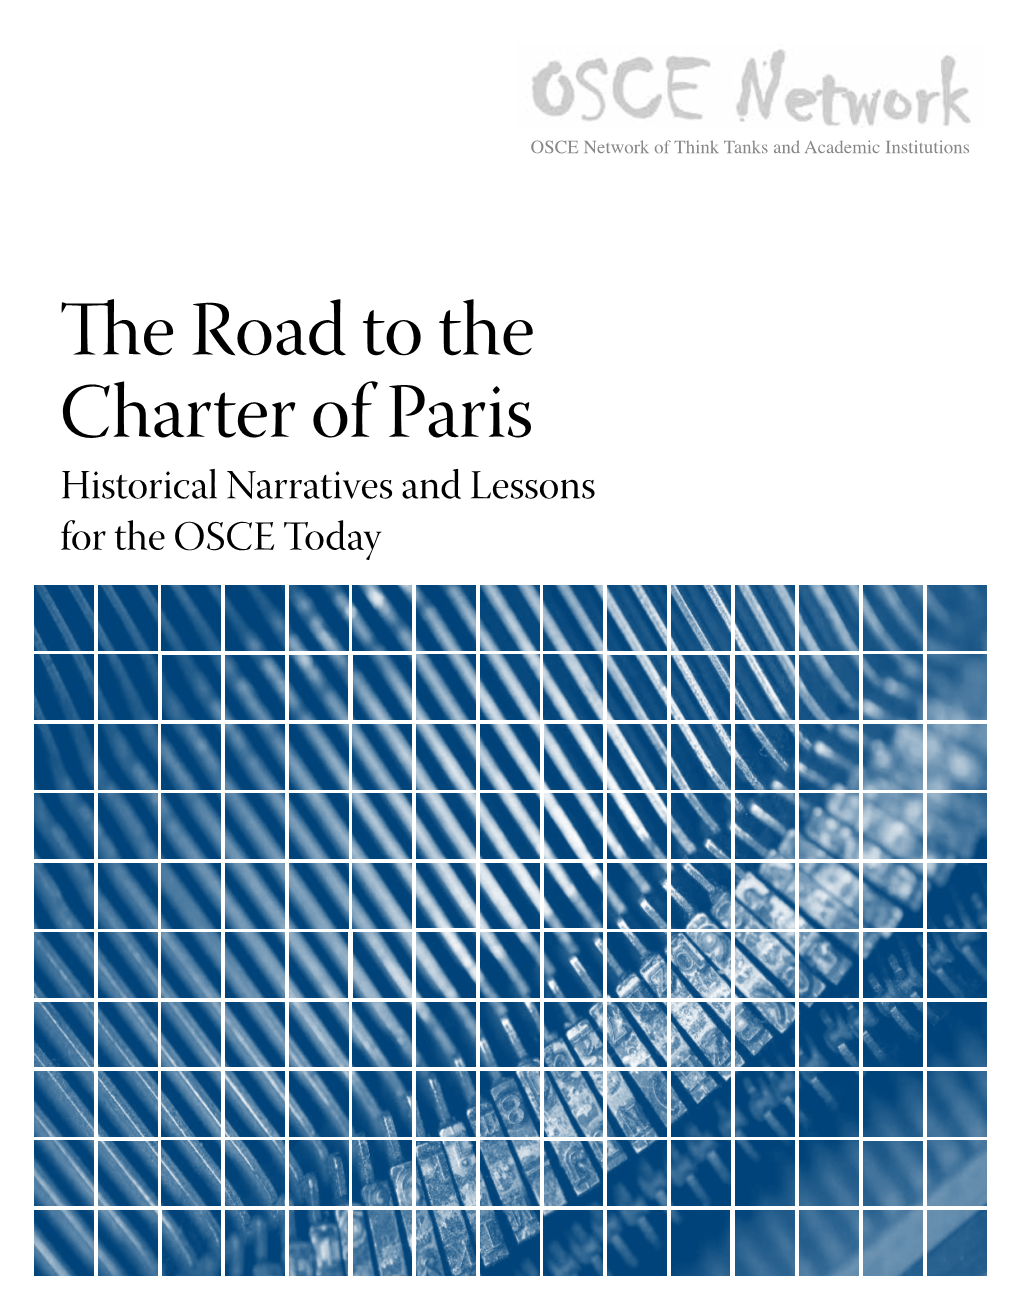 The Road to the Charter of Paris